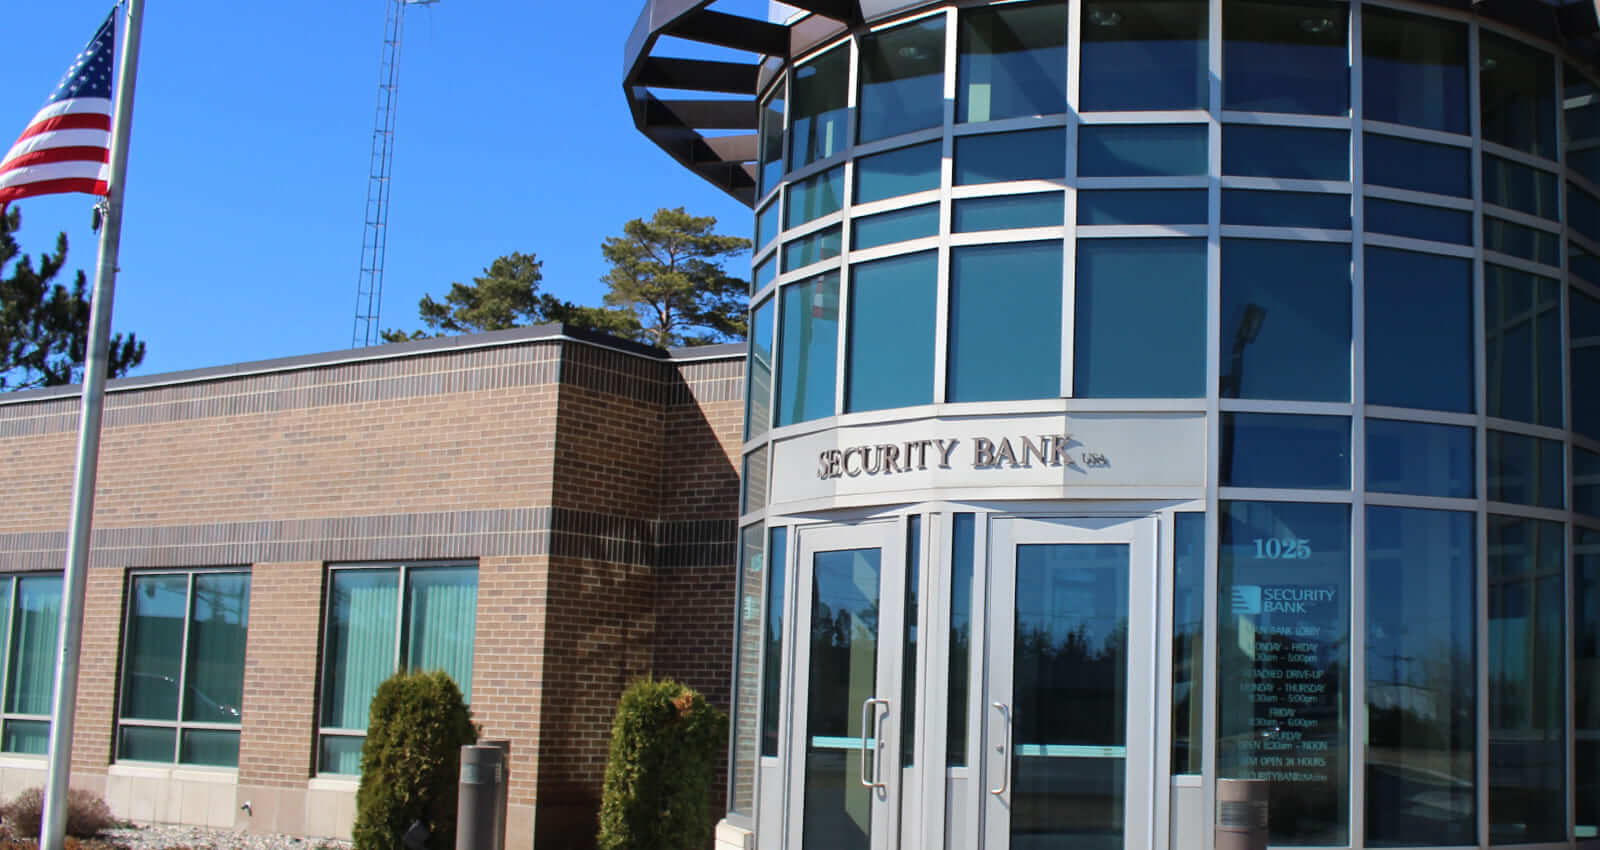 exterior of security bank building